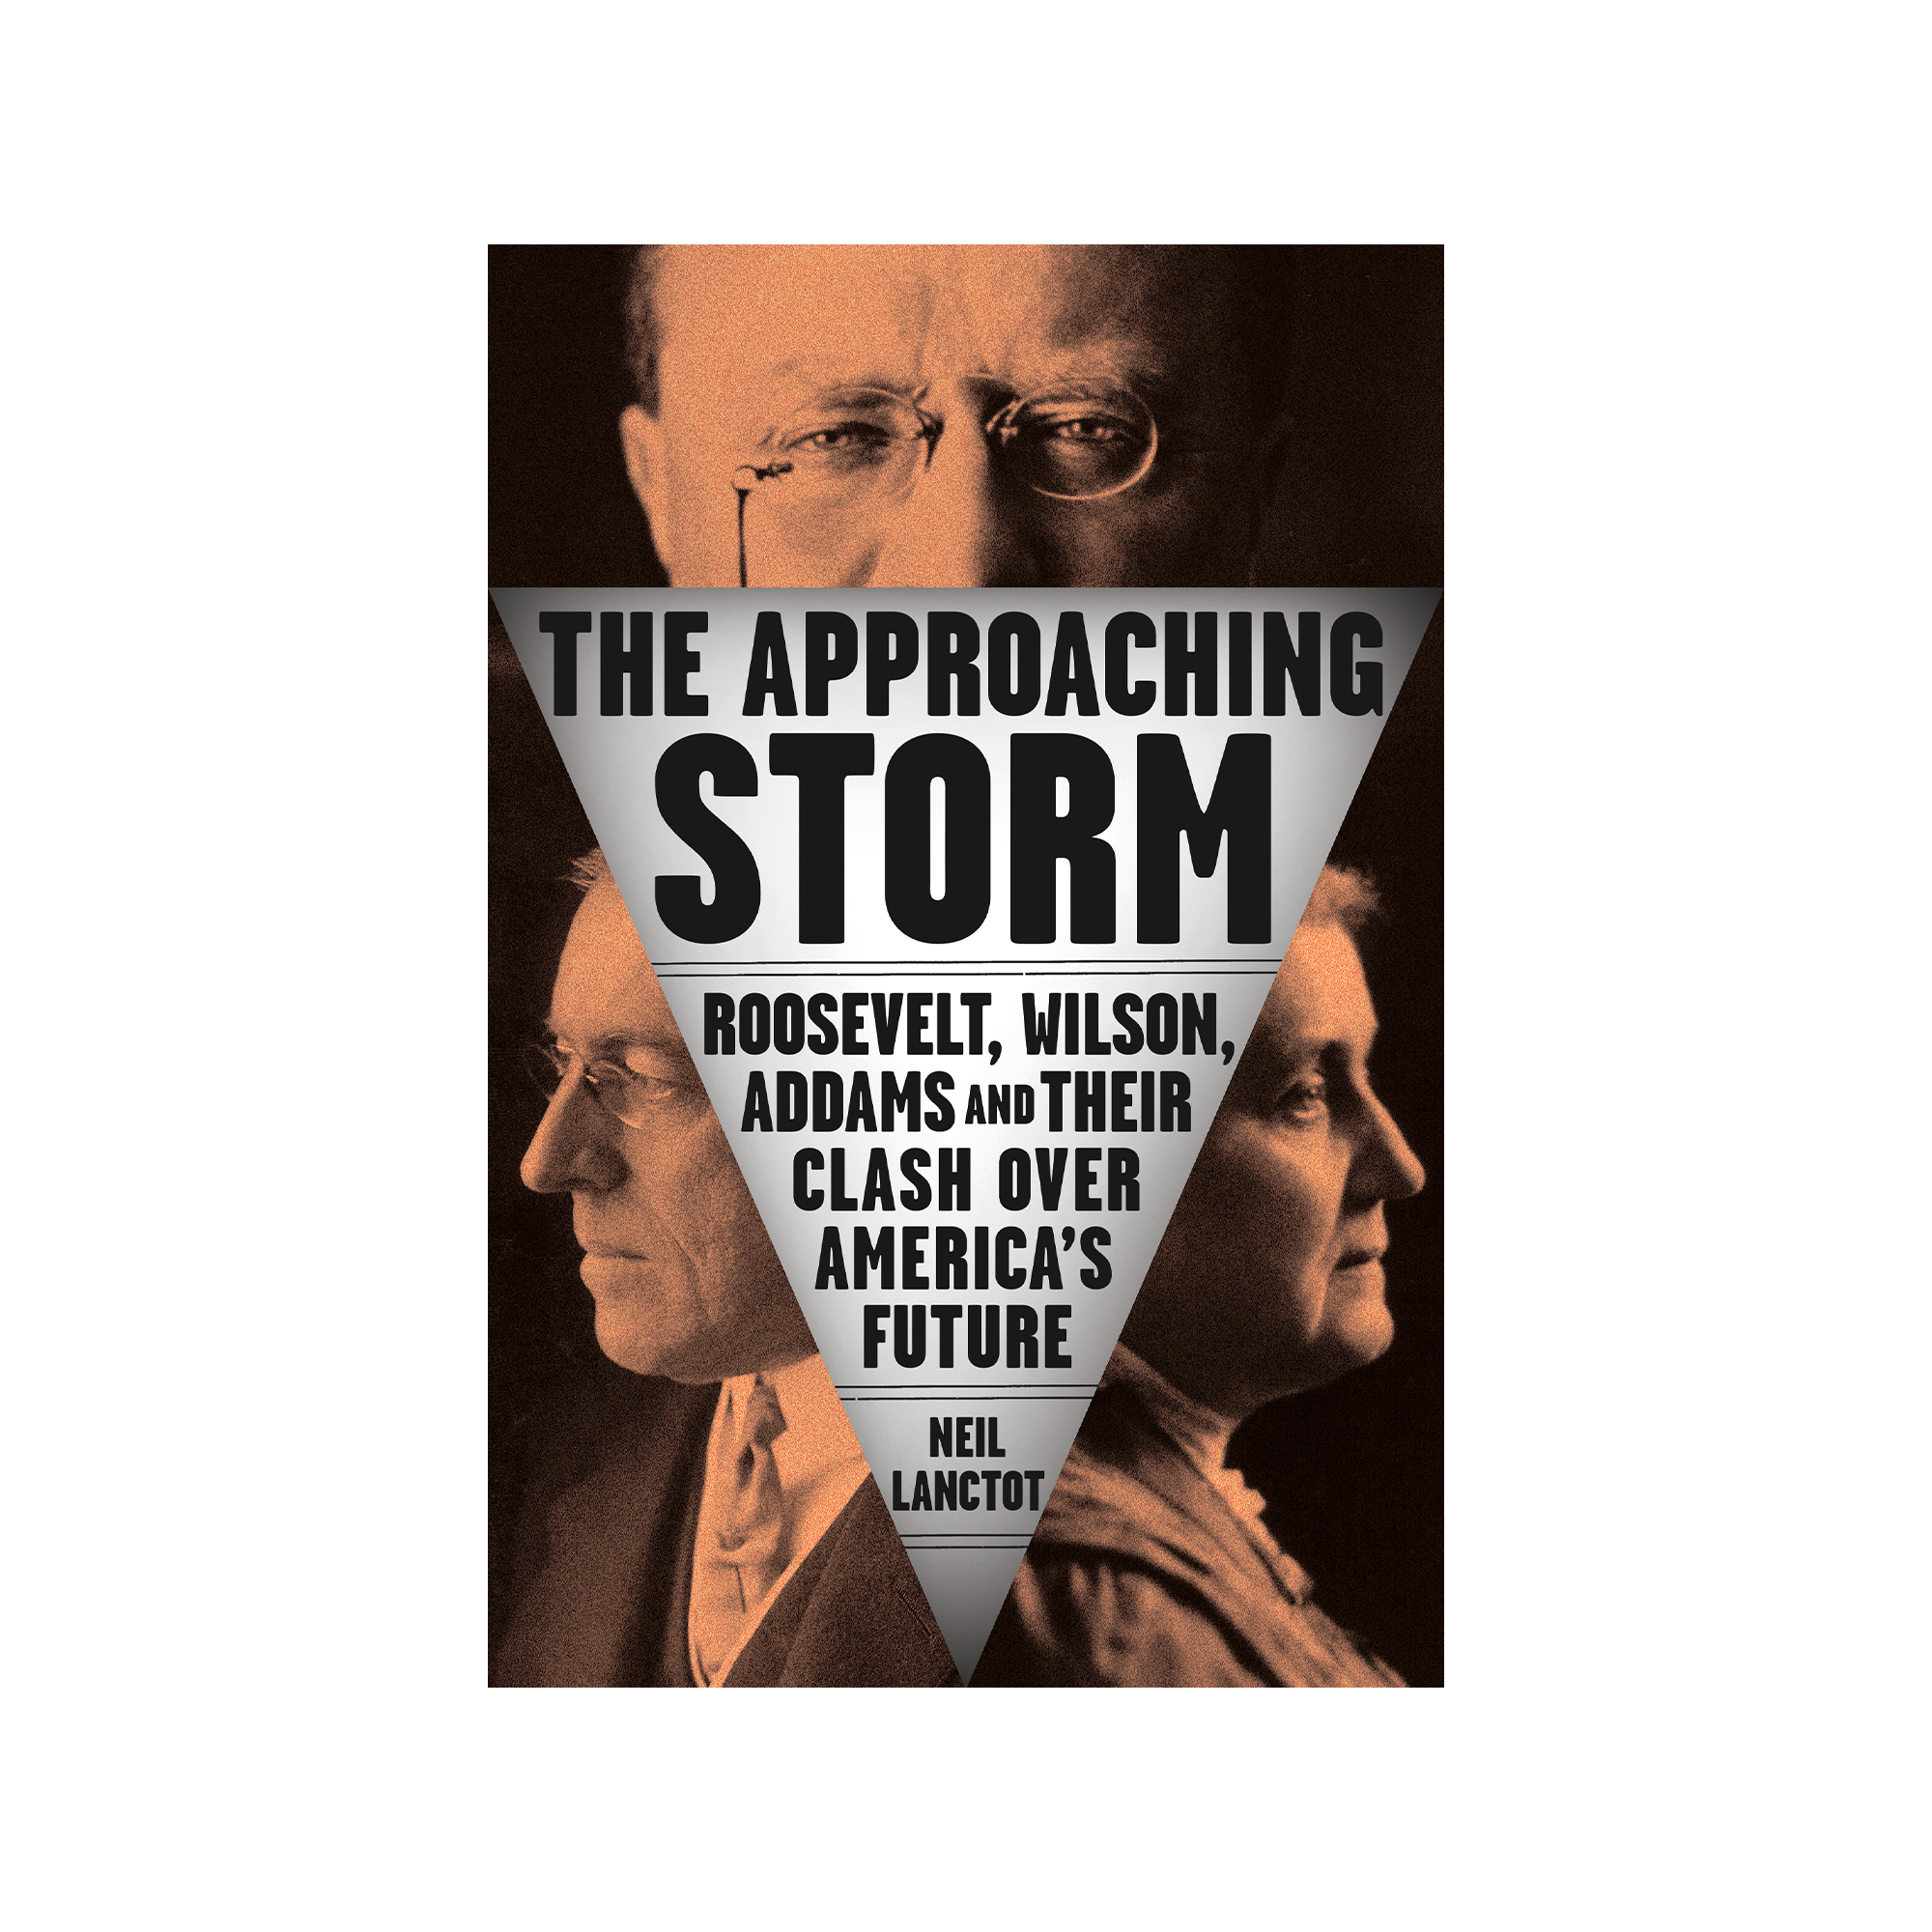 The Approaching Storm: Roosevelt, Wilson, Addams, and Their Clash Over  America's Future